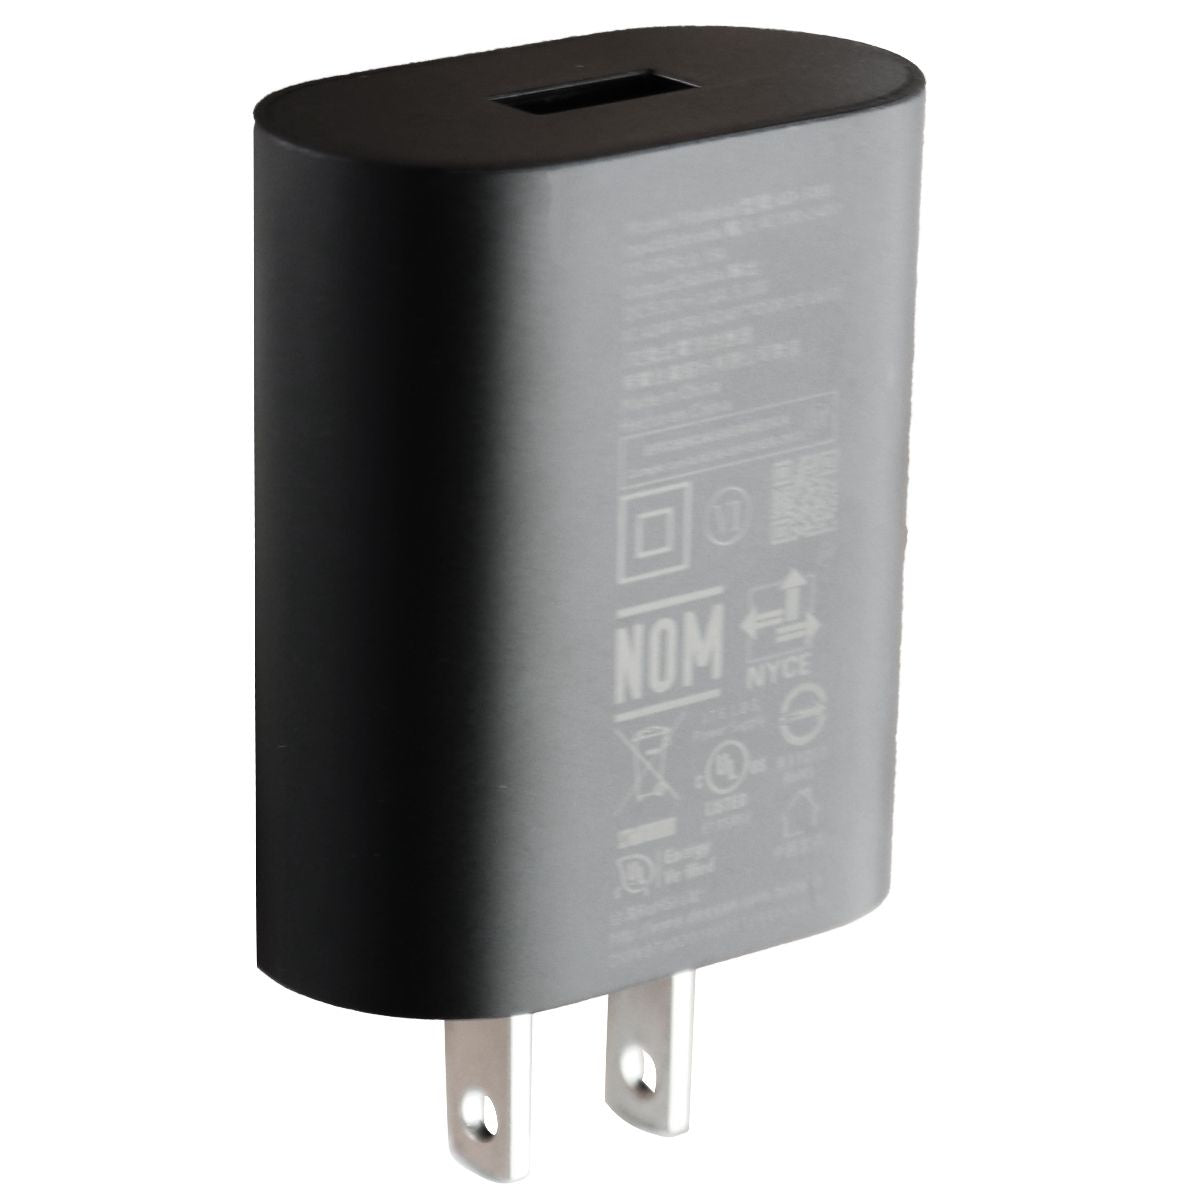 Nokia (5V/1A) Single USB Wall Charger AC Adapter - Black (AD-5WU) Cell Phone - Chargers & Cradles Nokia    - Simple Cell Bulk Wholesale Pricing - USA Seller